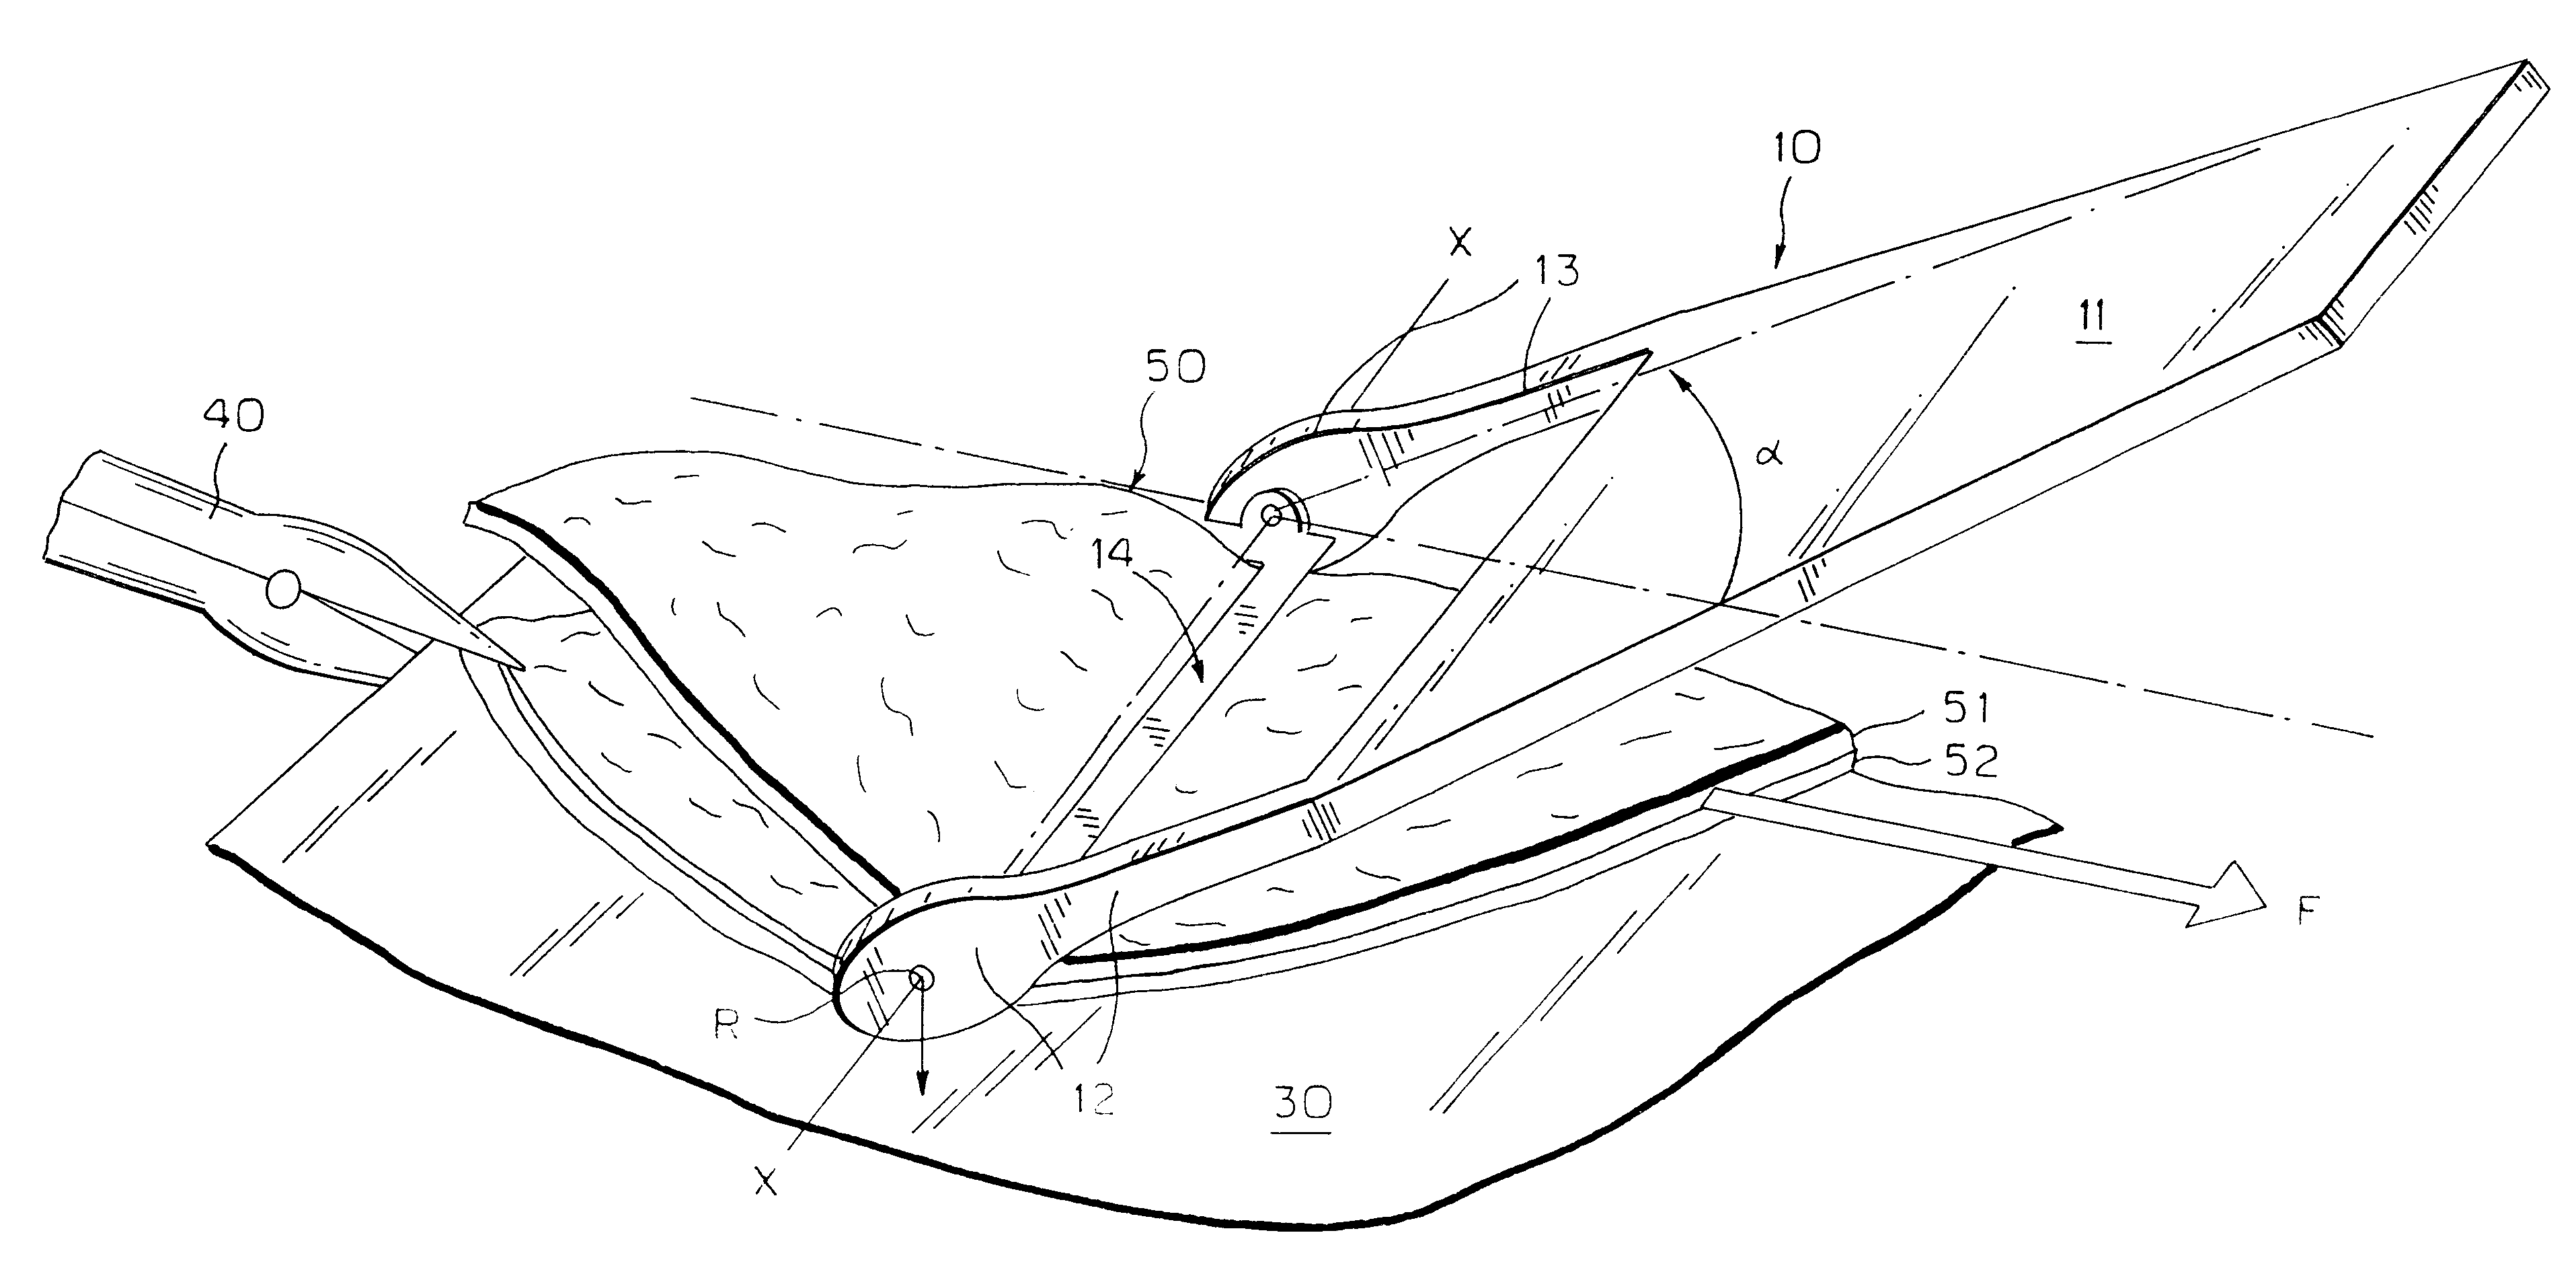 Hand-held device for preparation of a skin graft by tangential excision of layers of tissue